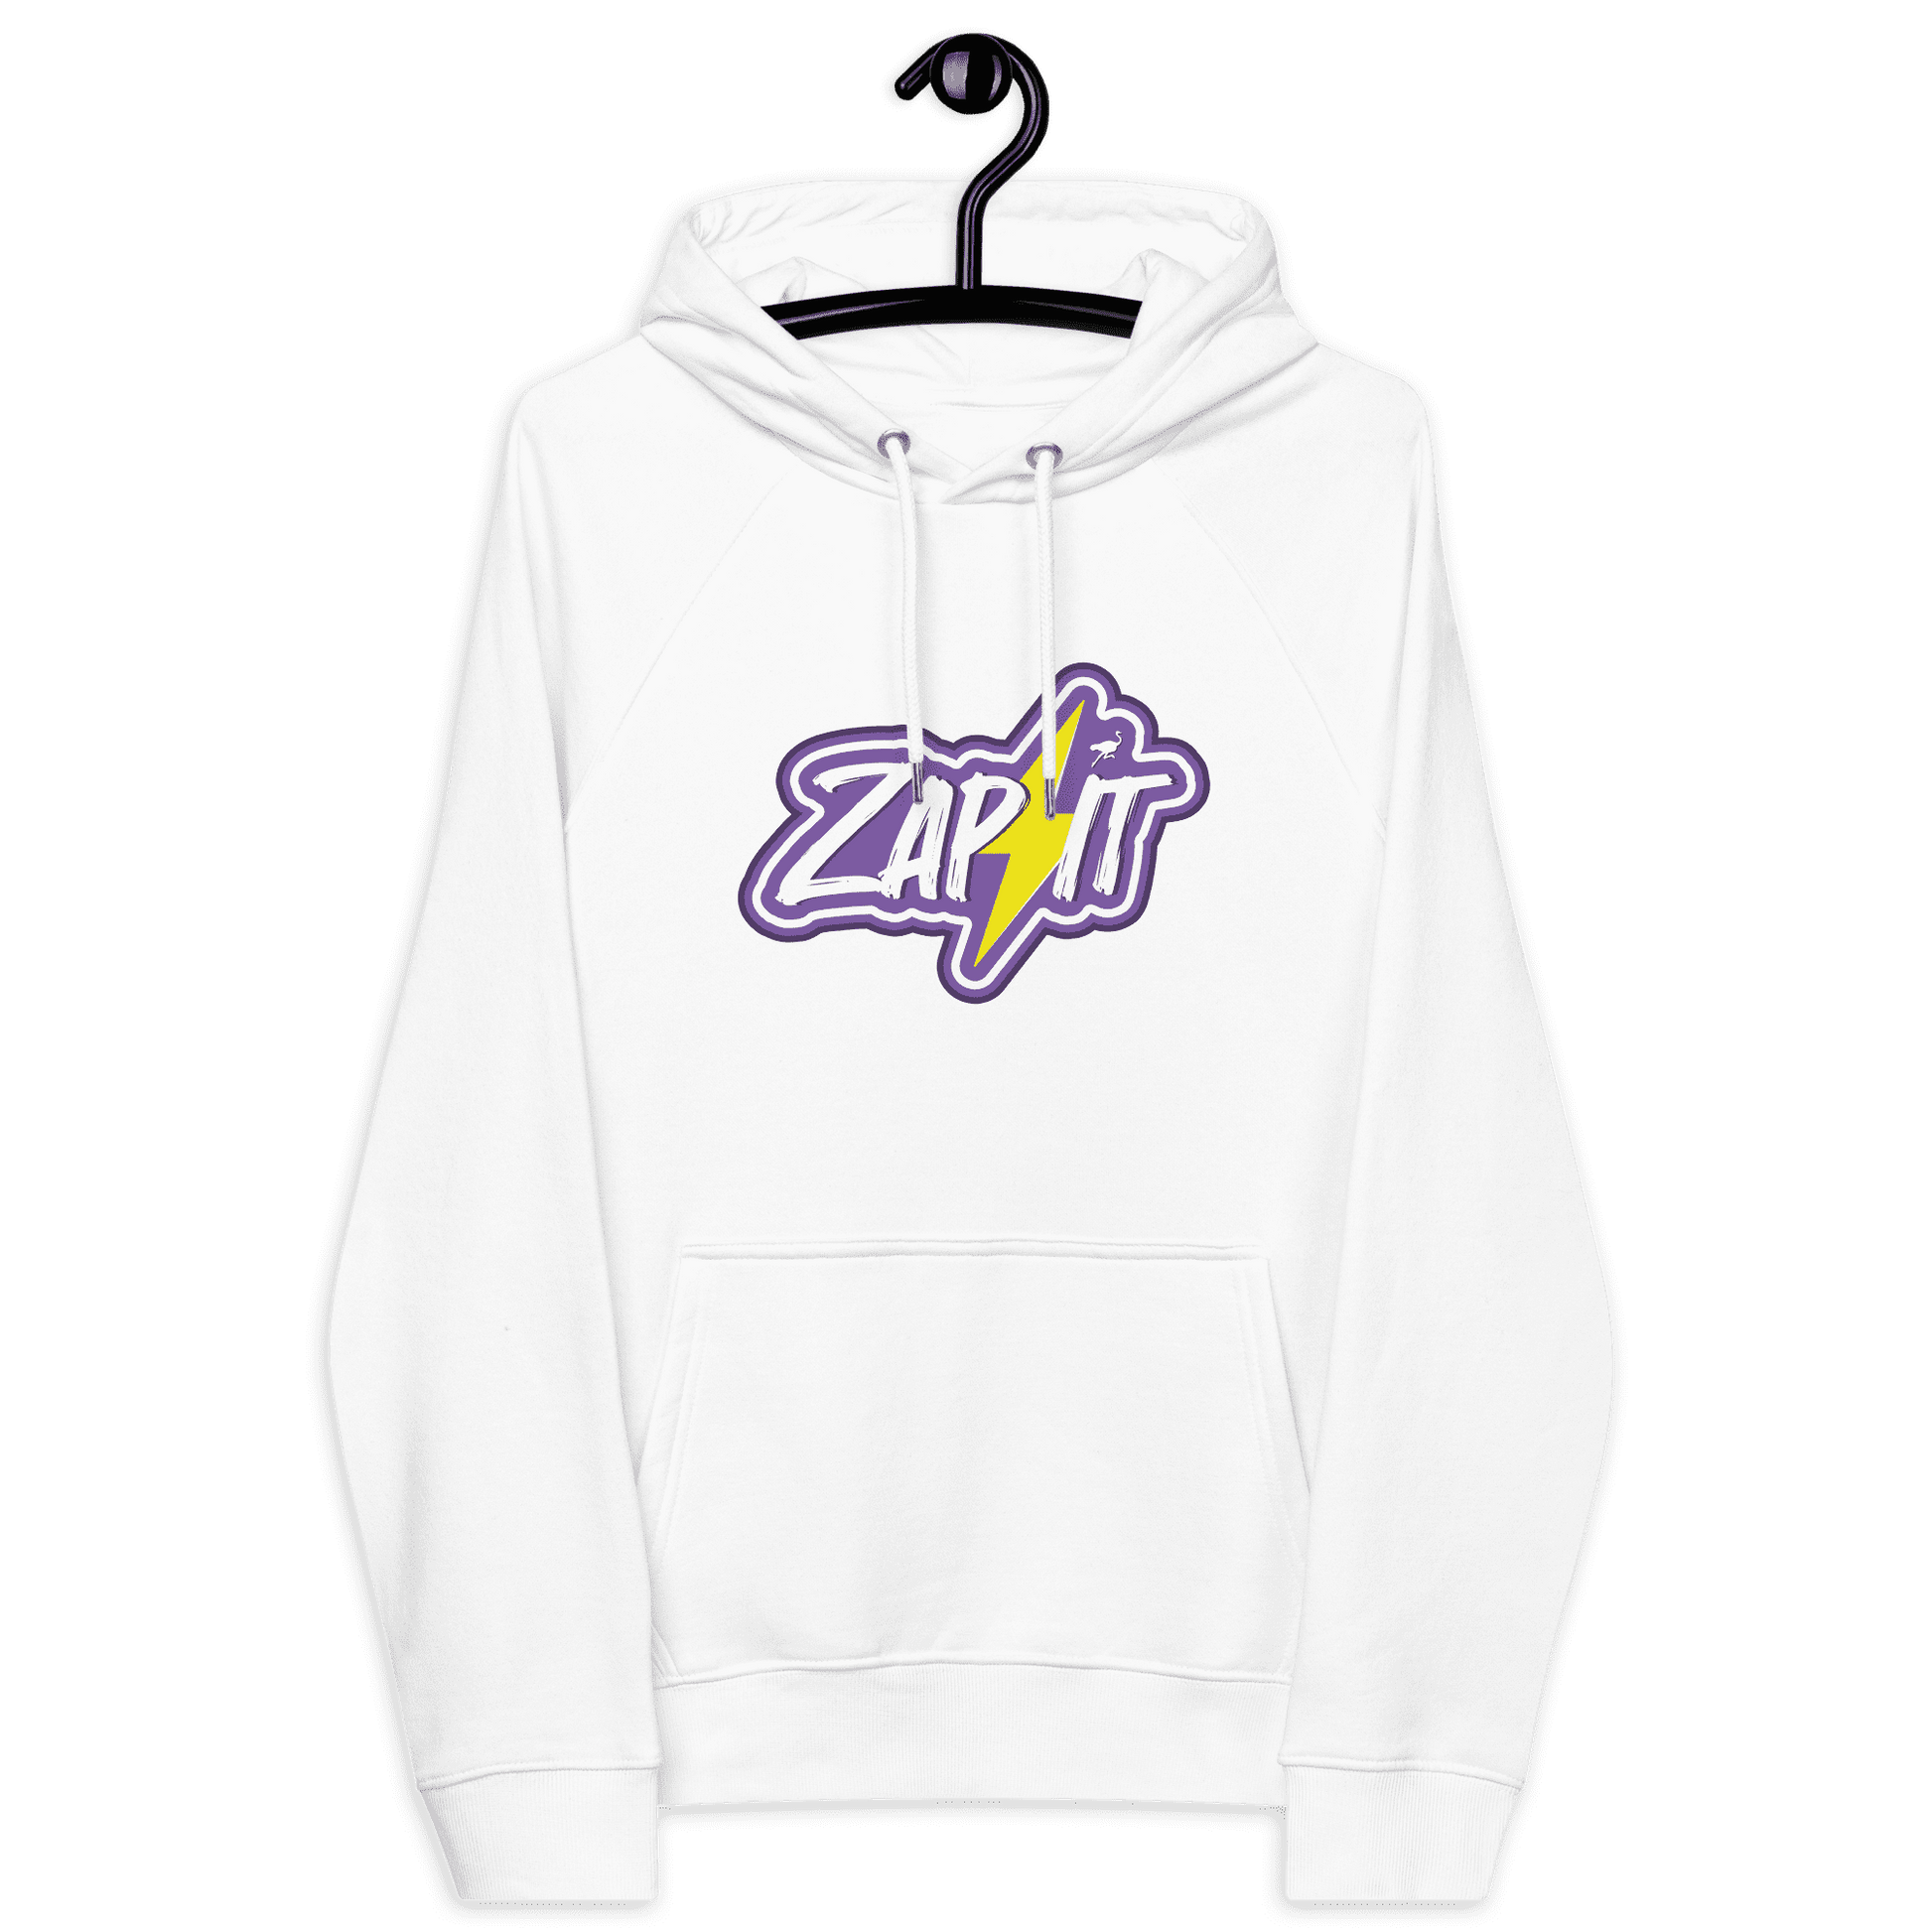 Front view of a white nostr hoodie.